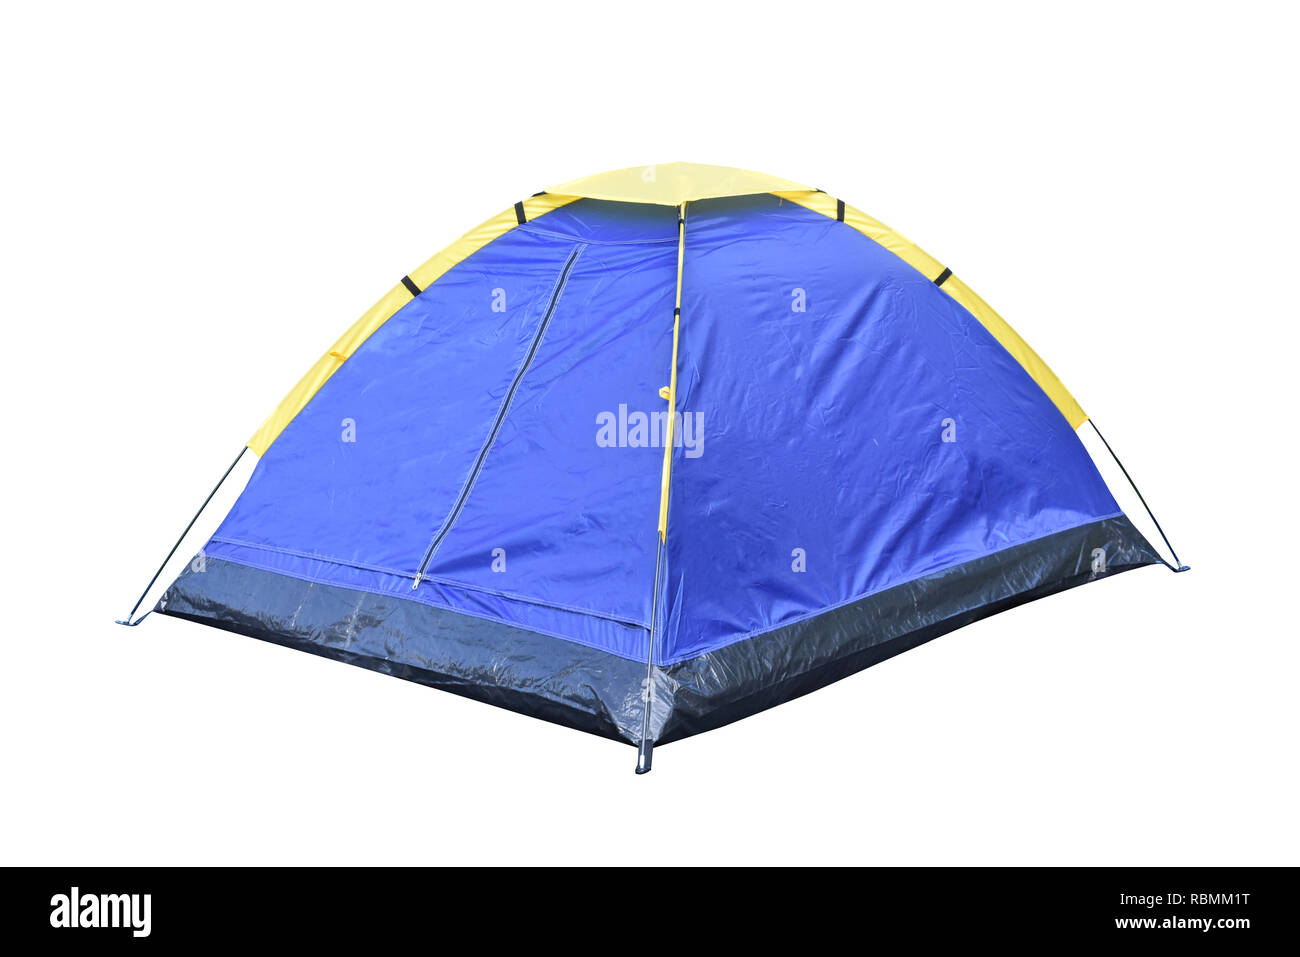 Blue camping tent dicut on white background. Stock Photo